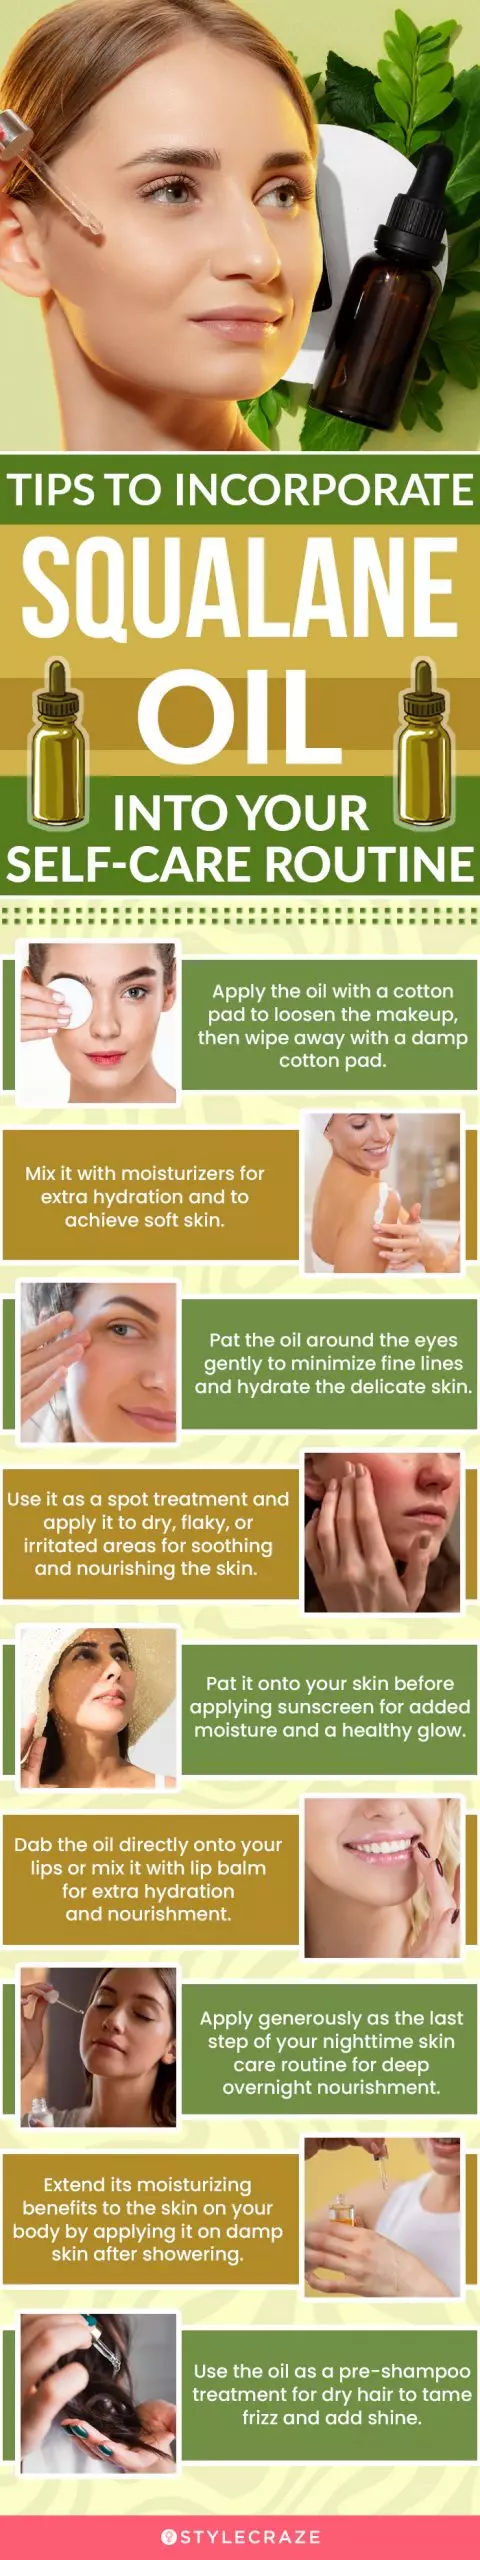 Incorporating Squalane Oil Into Your Self-Care Routine (infographic)